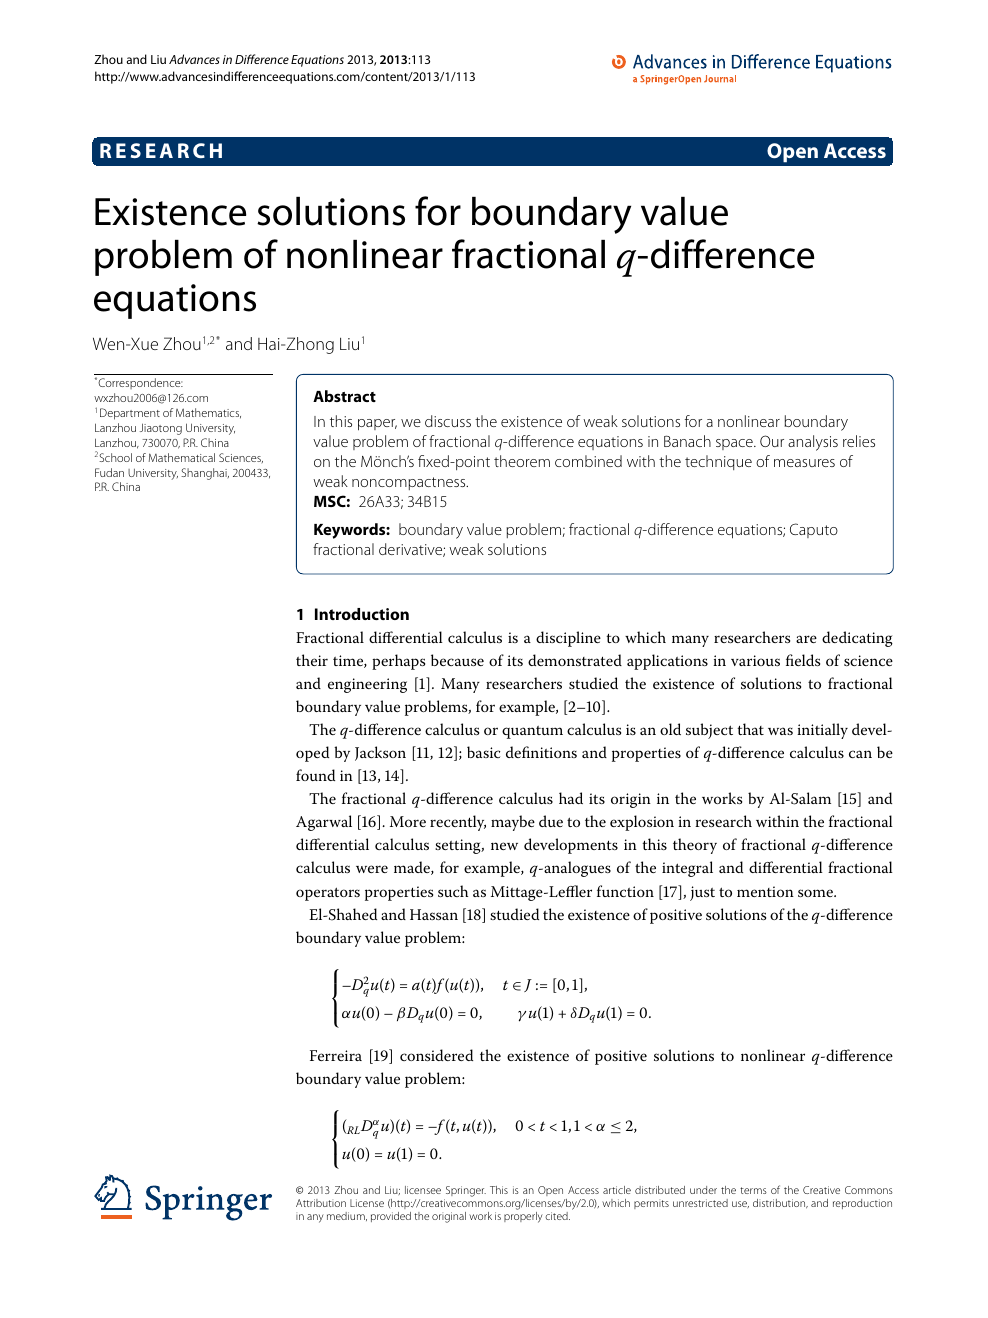 Existence Solutions For Boundary Value Problem Of Nonlinear Fractional Q Difference Equations Topic Of Research Paper In Mathematics Download Scholarly Article Pdf And Read For Free On Cyberleninka Open Science Hub